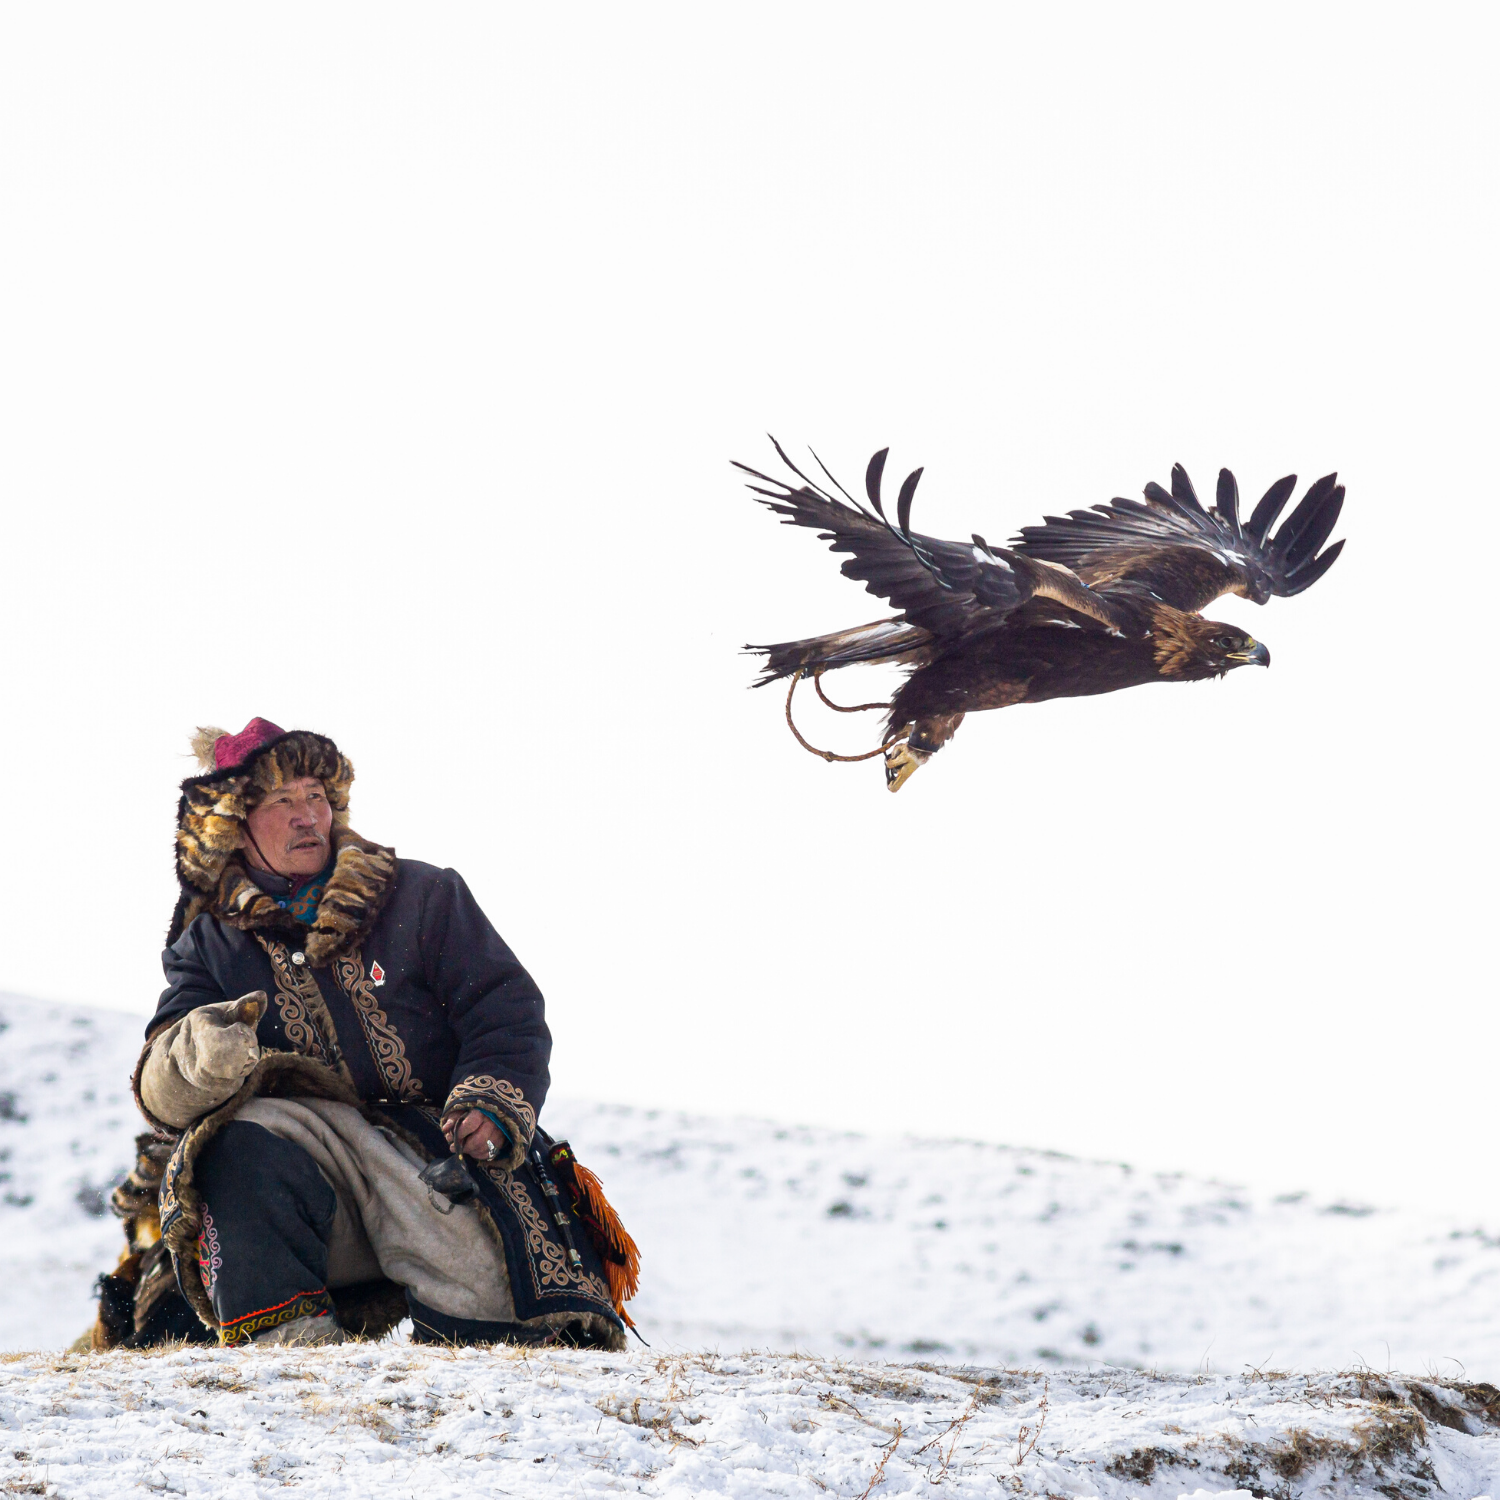 PHOTOGRAPHY & VIDEOGRAPHY IN MONGOLIA